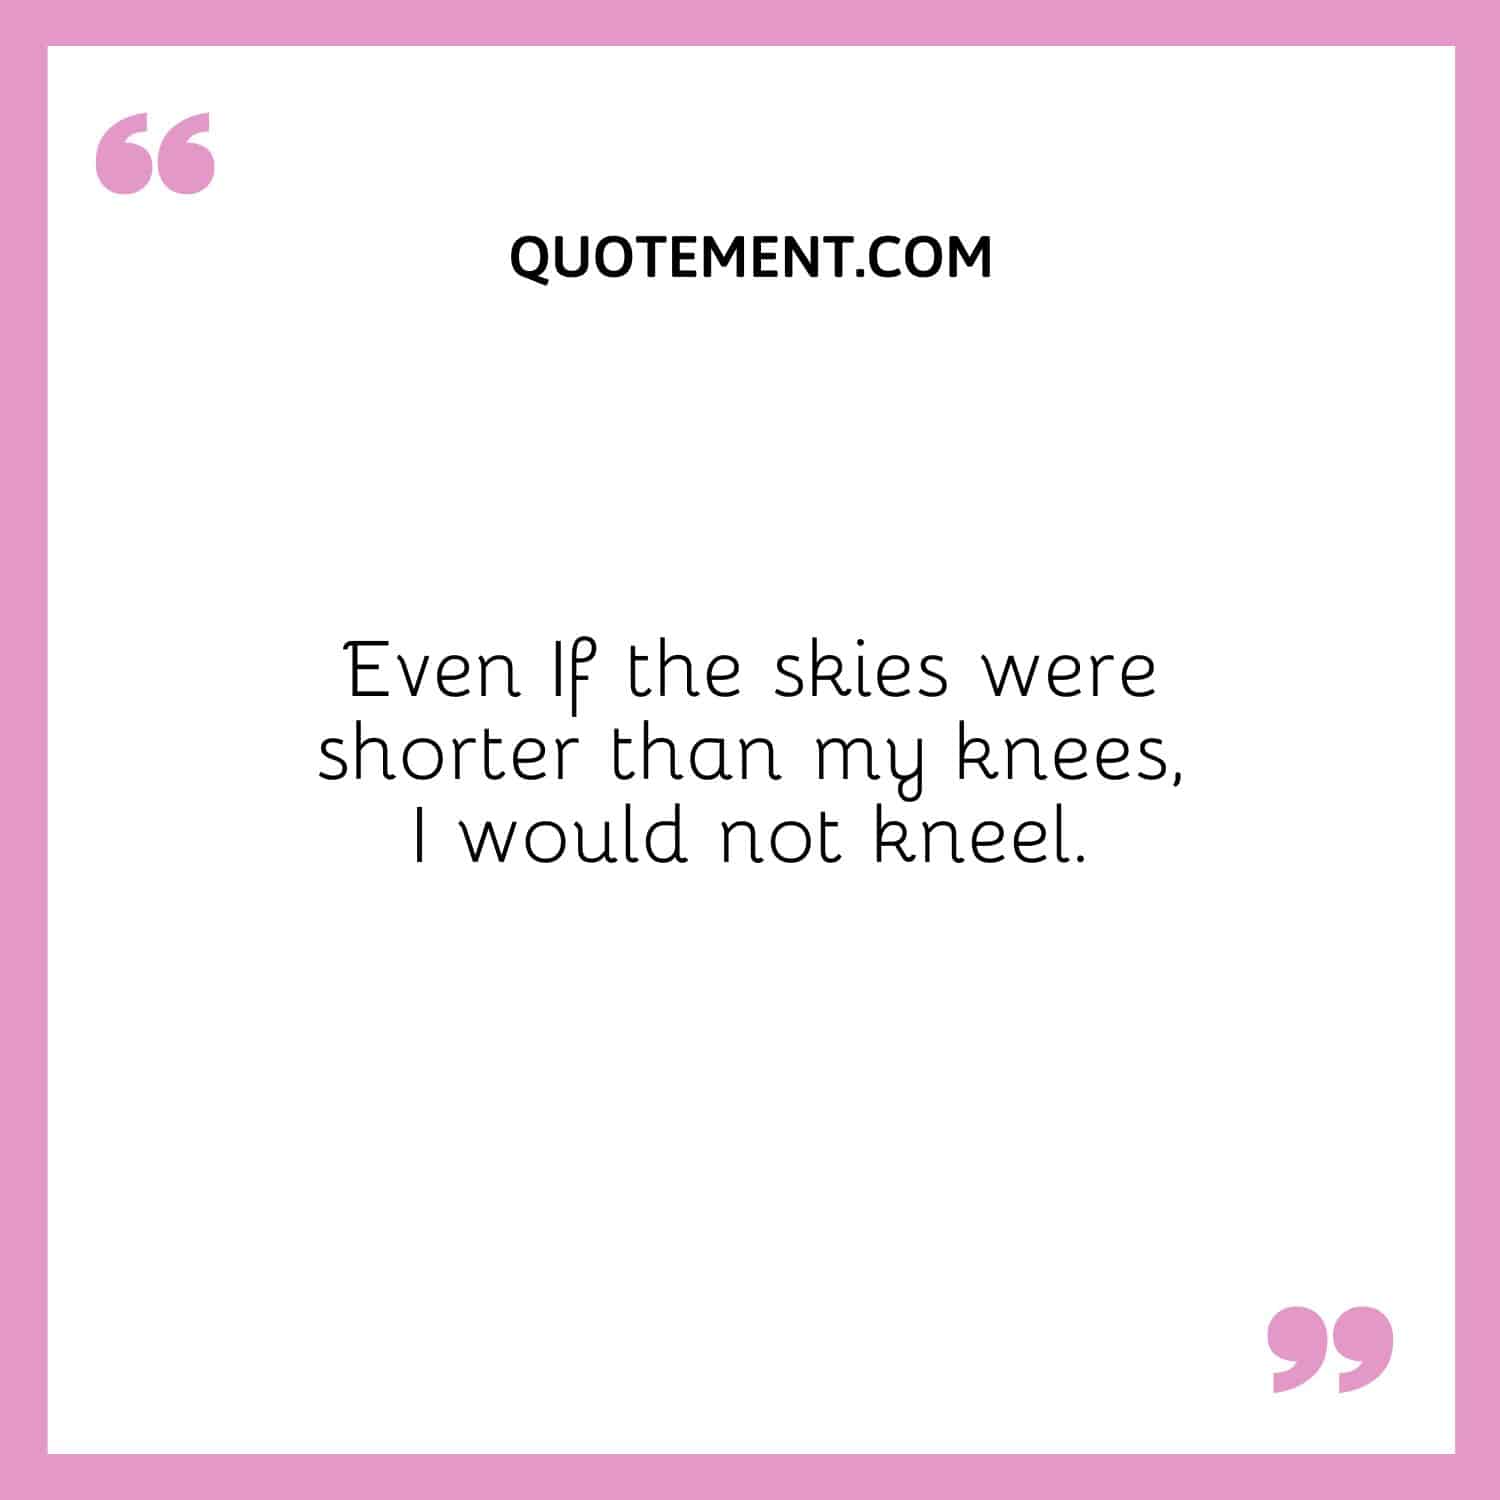 Even If the skies were shorter than my knees, I would not kneel.